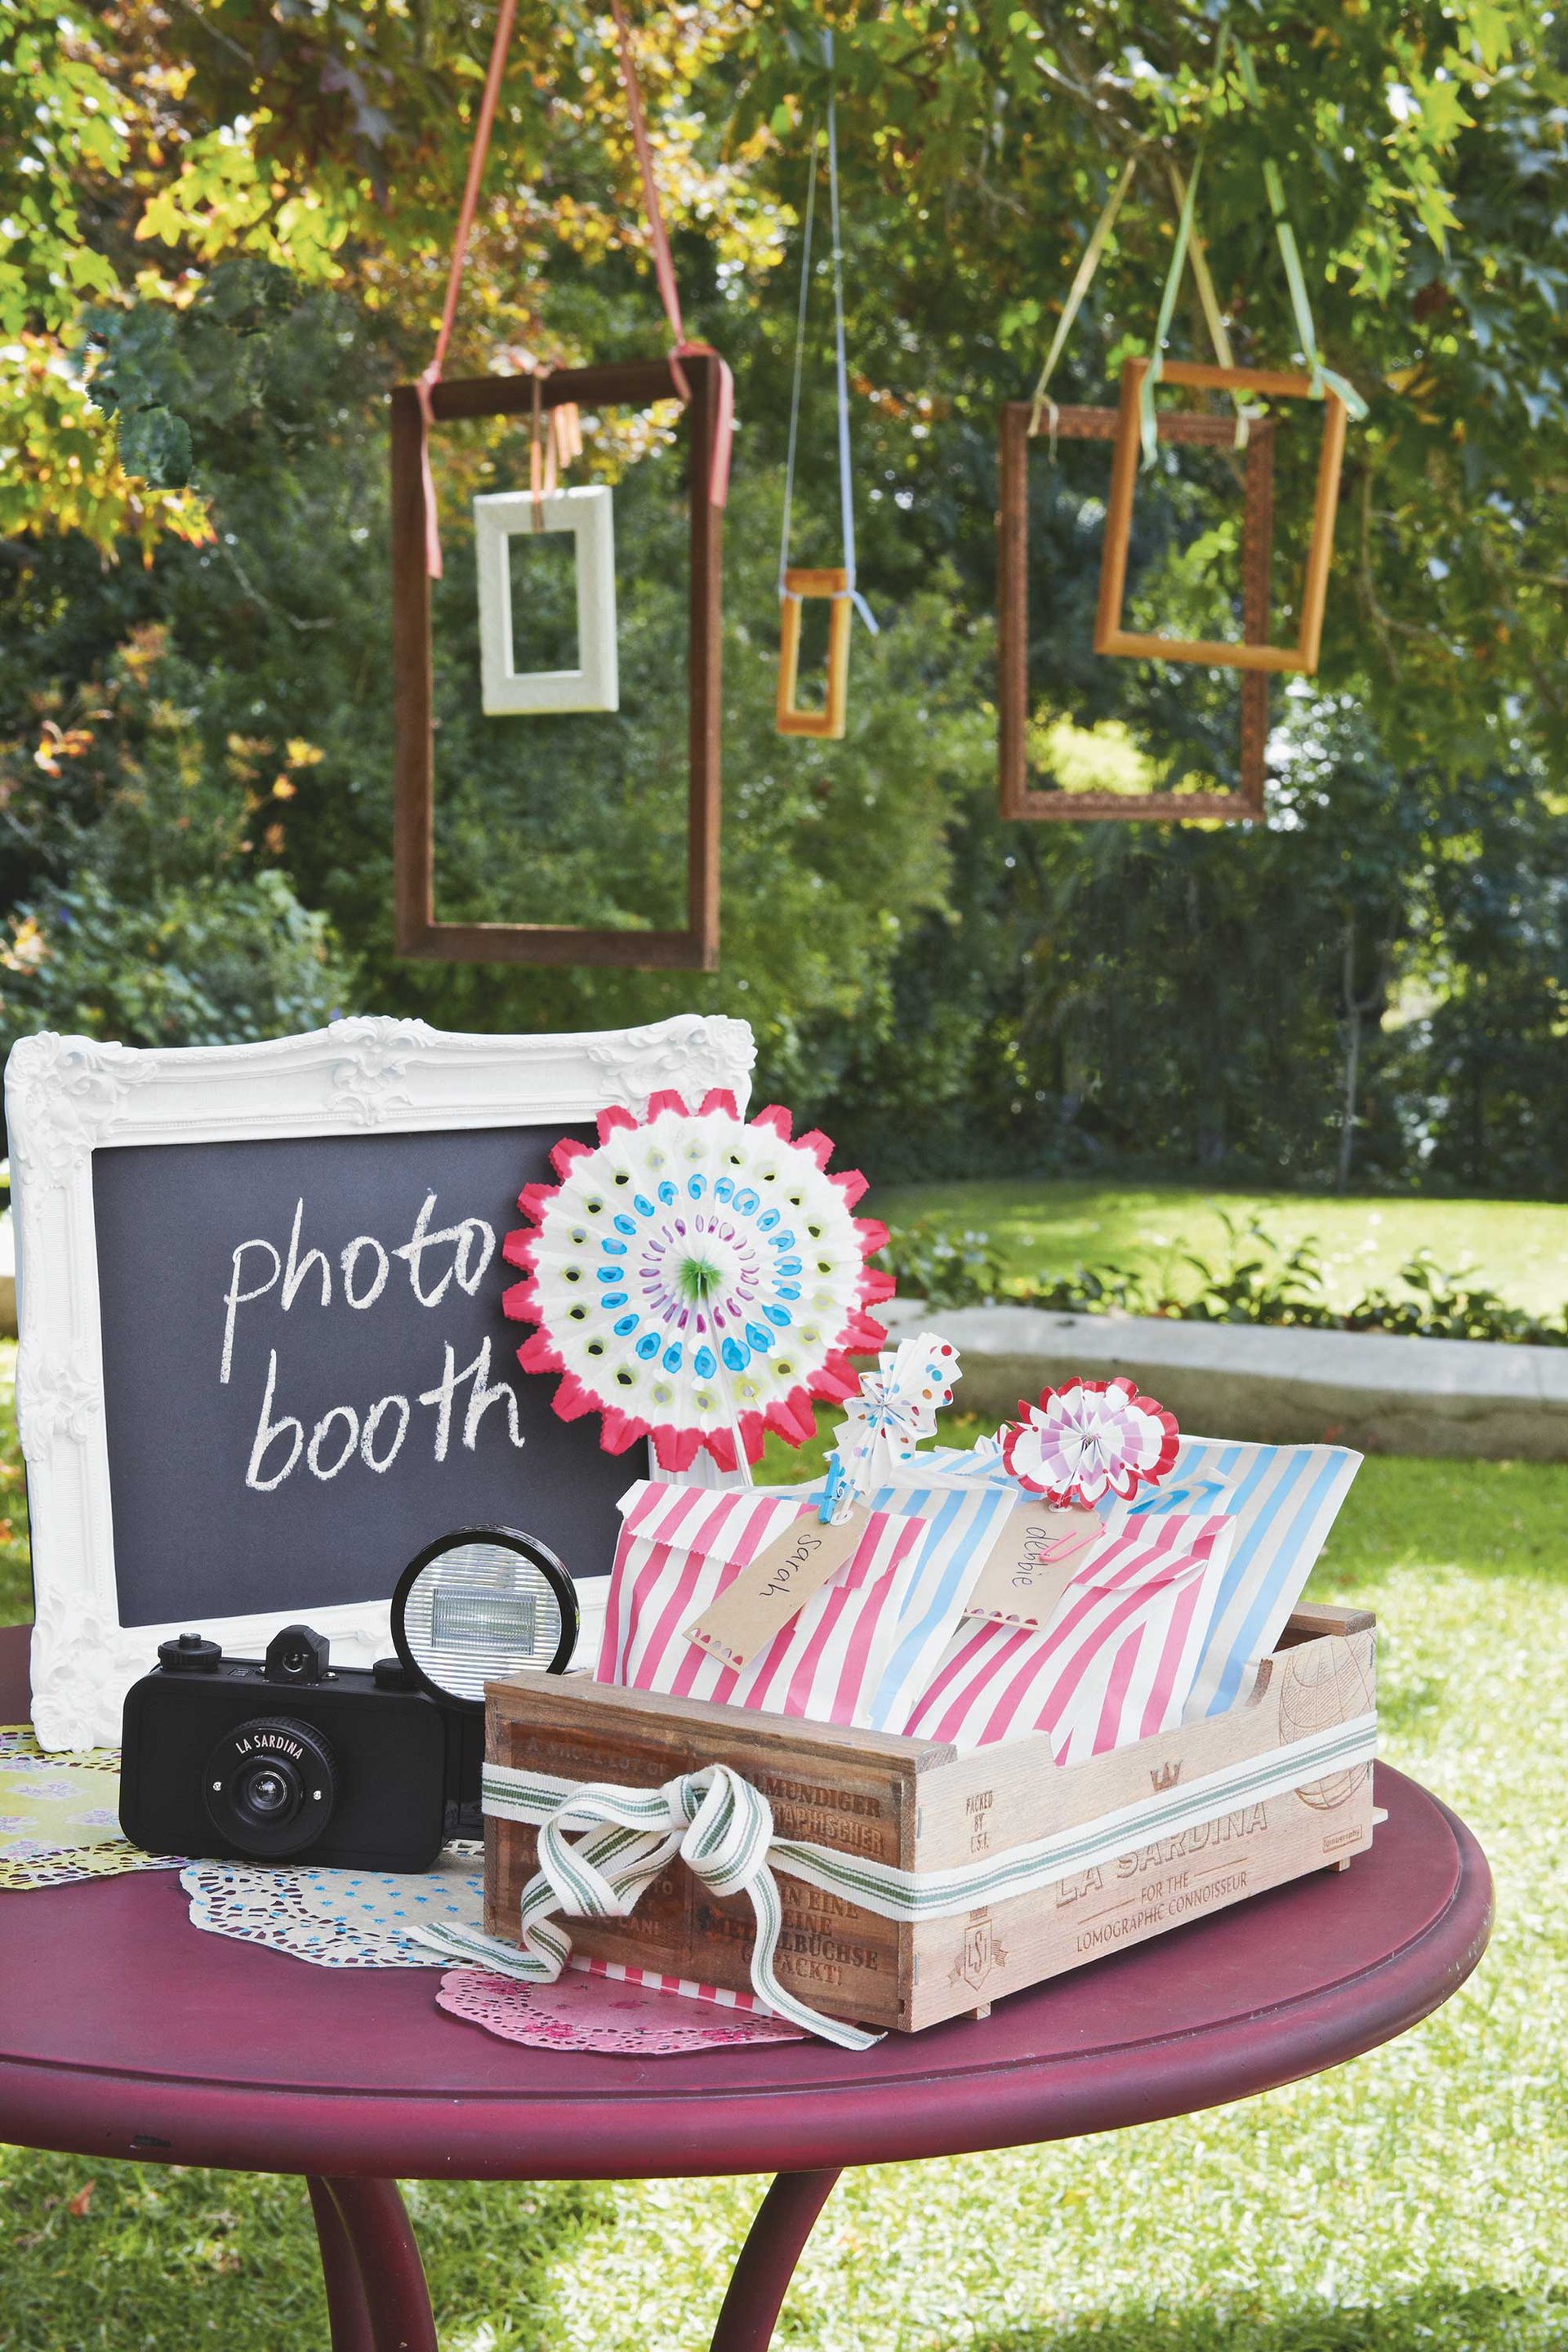 <p>                     From selfies to group shots – you can be sure that they'll be a camera or two floating around at your next garden bash. So why not embrace it and help those memories last forever with a dedicated photo zone?                   </p>                                      <p>                     You could hang thrifted frames from tree branches, or create a stylish backdrop with an old decorated sheet (or even go for an on-trend flower wall if you're looking for something a little fancier).                   </p>                                      <p>                     And how about setting up a dress-up trunk nearby, full of hats, sunglasses, and other fun props? Position a handful of disposable cameras on a small table ready to be used. Then, you can enjoy the element of surprise when you develop them at a later date – the pictures will be priceless.                   </p>